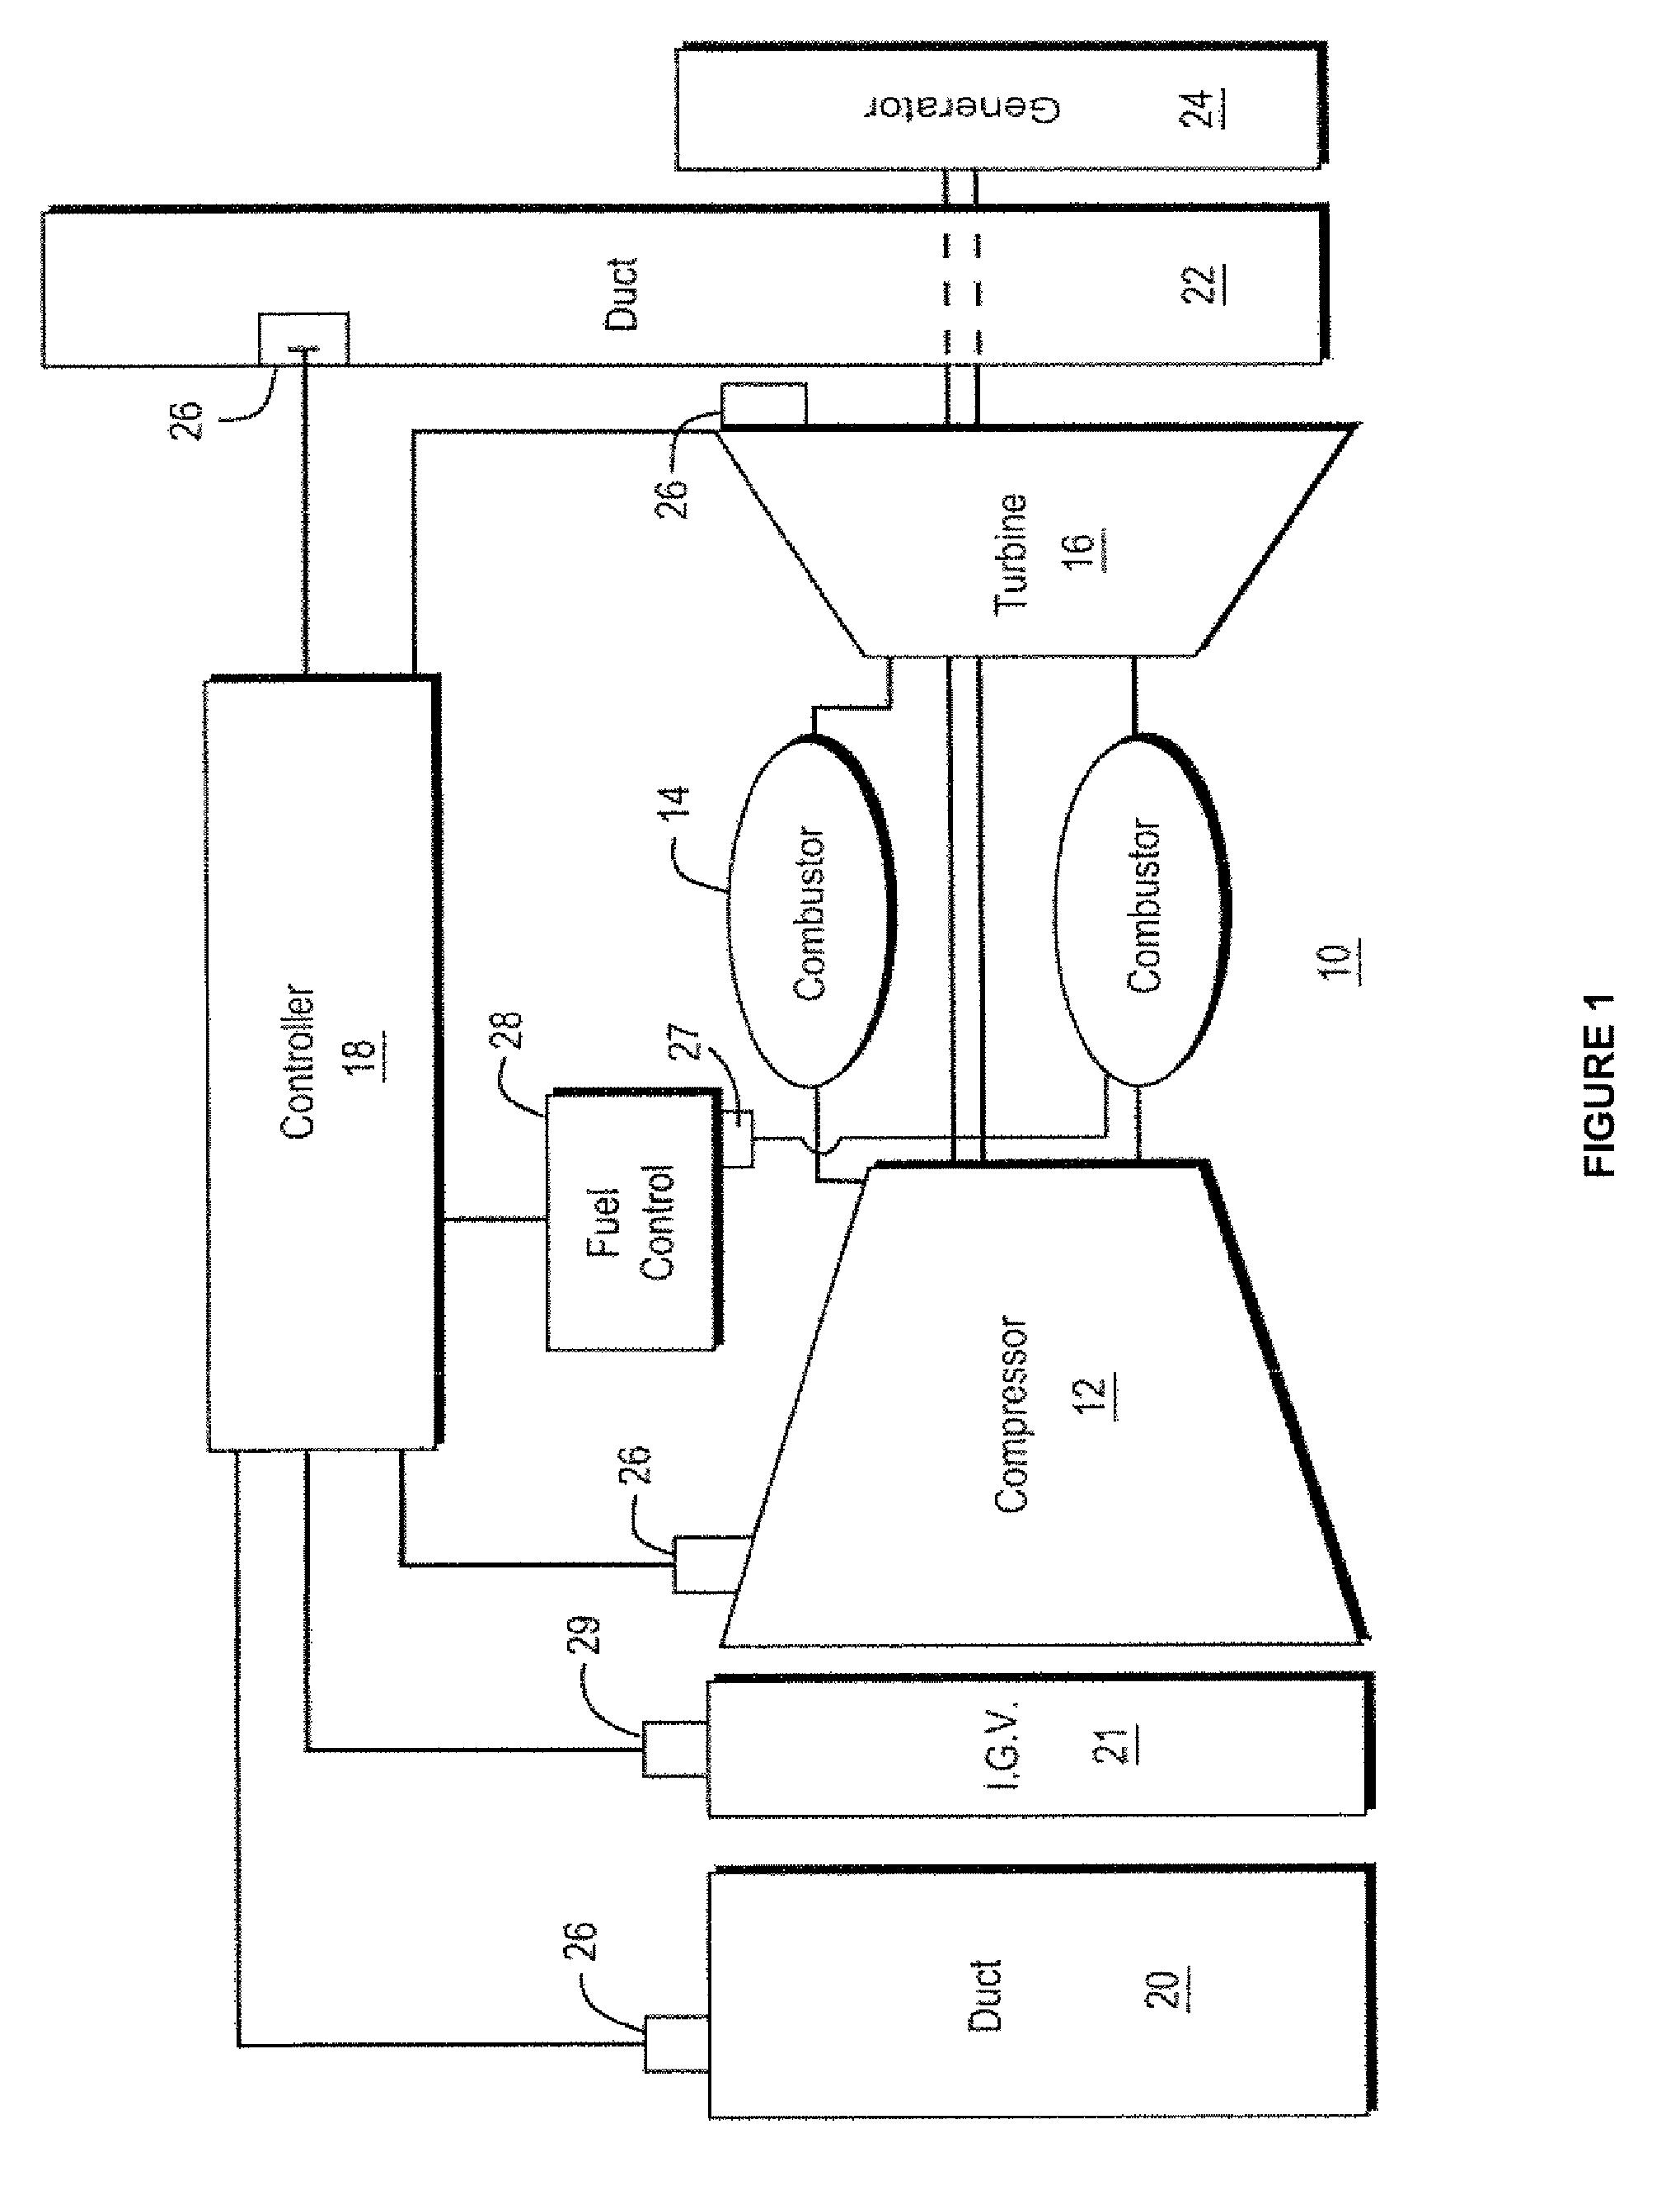 Methods and systems for providing real-time comparison with an alternate control strategy for a turbine